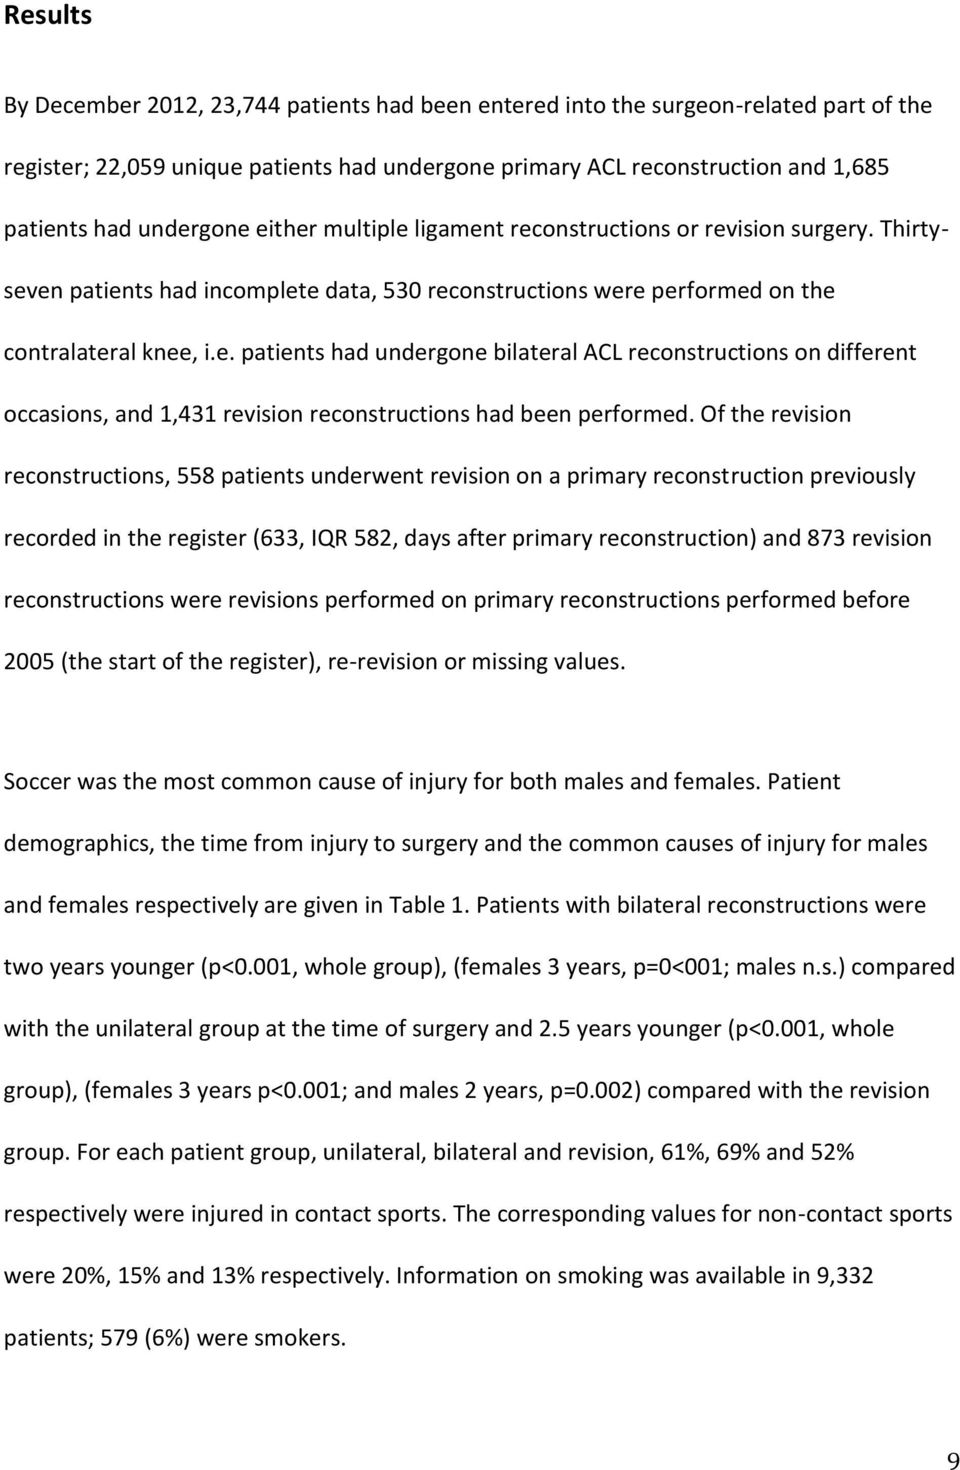 Of the revision reconstructions, 558 patients underwent revision on a primary reconstruction previously recorded in the register (633, IQR 582, days after primary reconstruction) and 873 revision